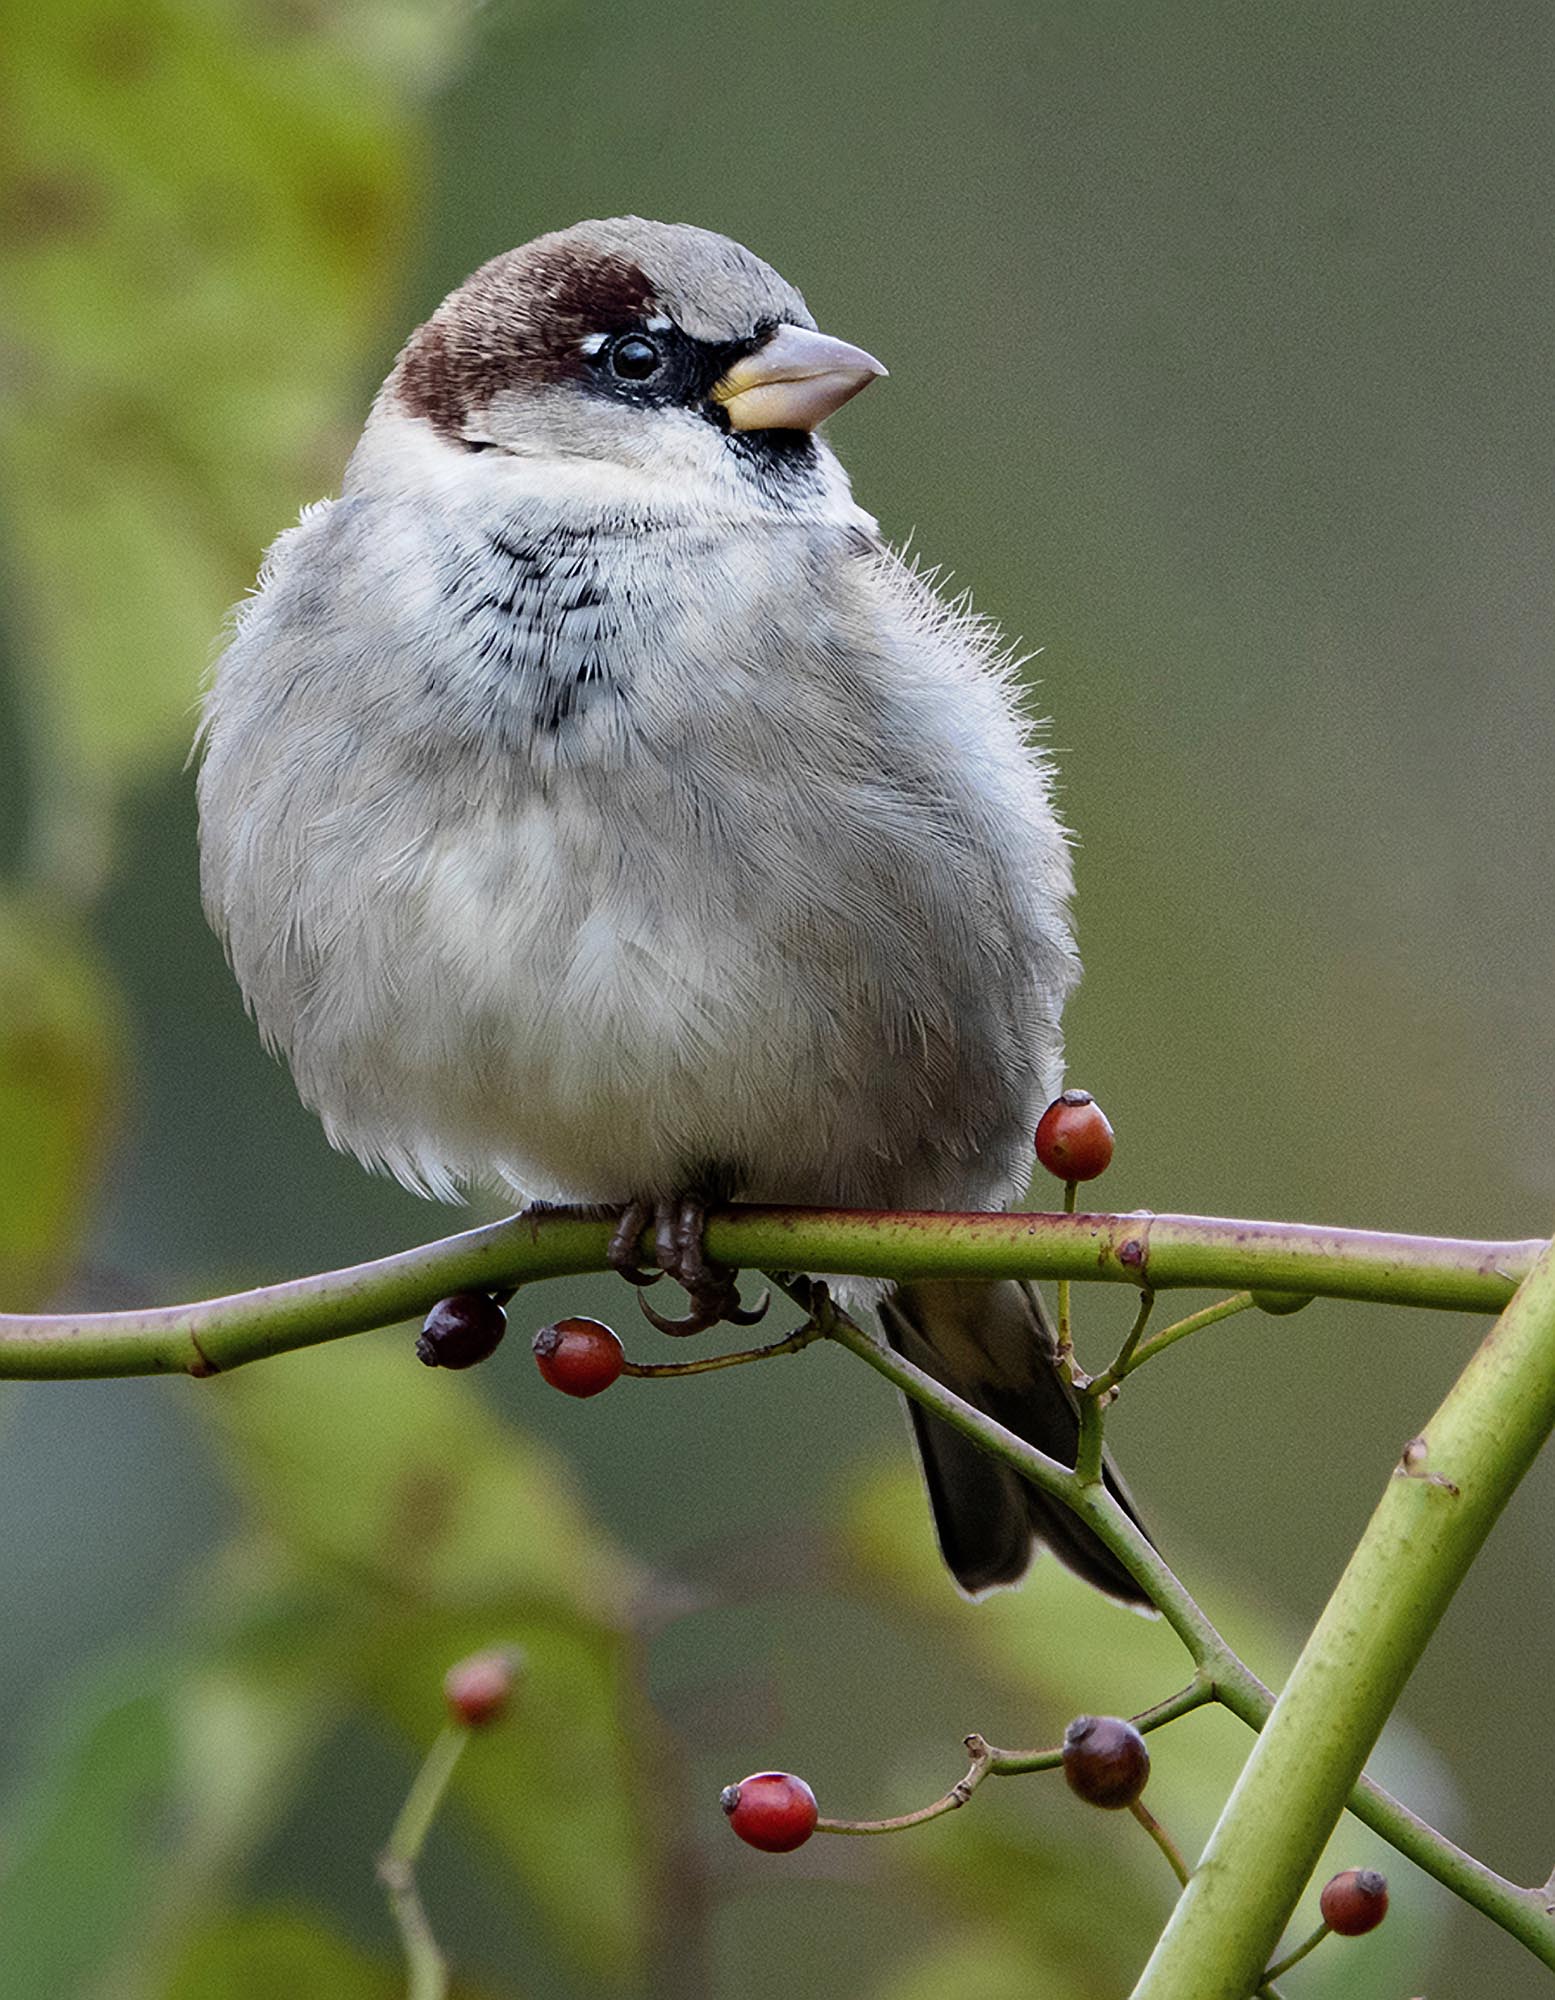 Sparrow and Berries